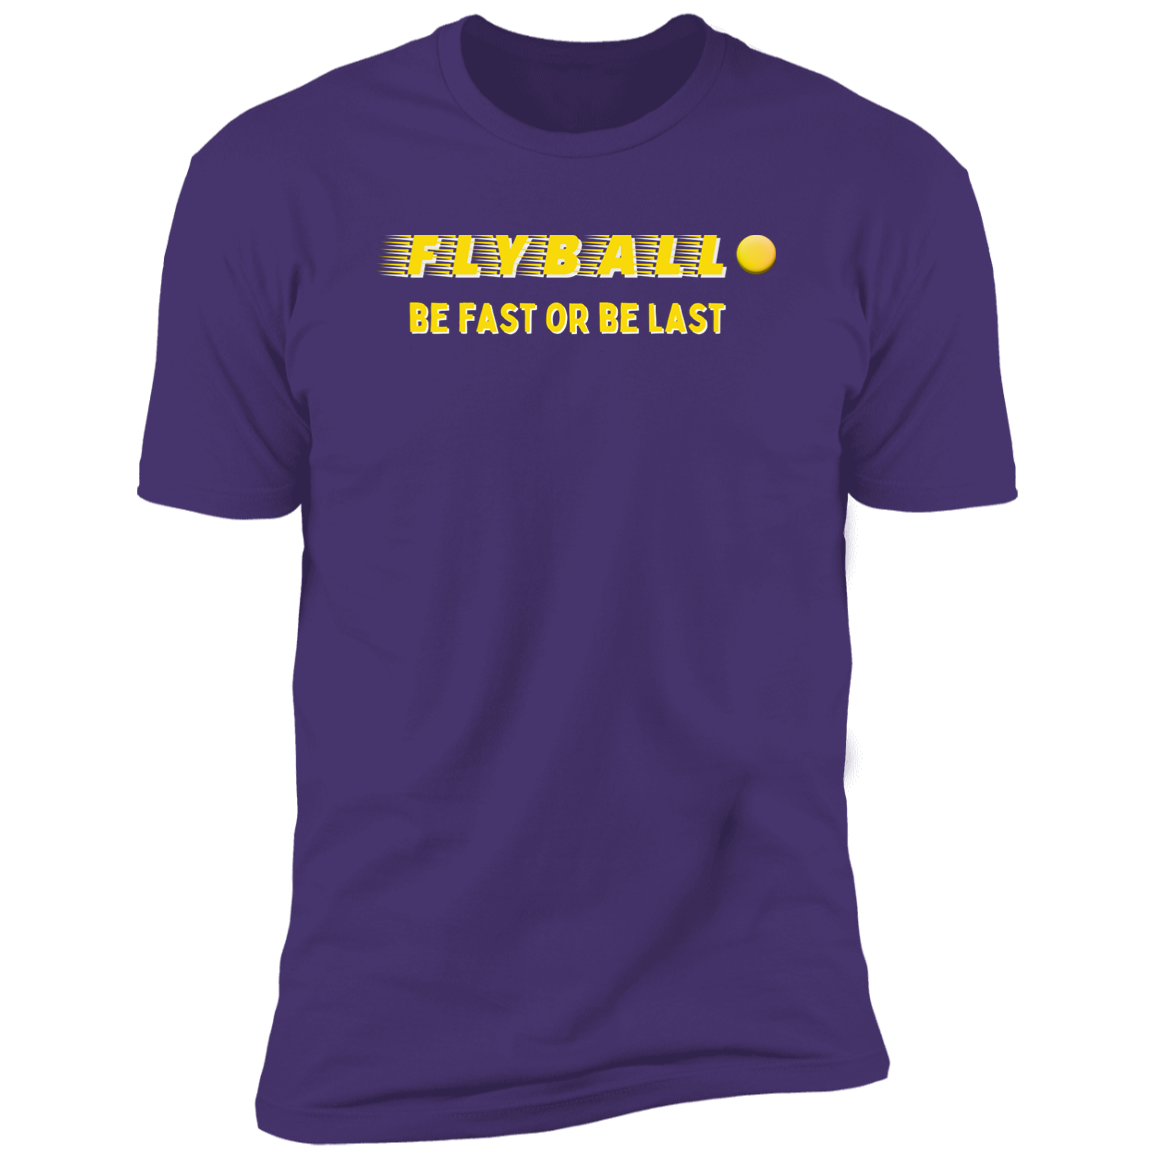 Flyball Be Fast or Be Last Dog Sport T-shirt, Flyball Shirt for humans, in purple rush